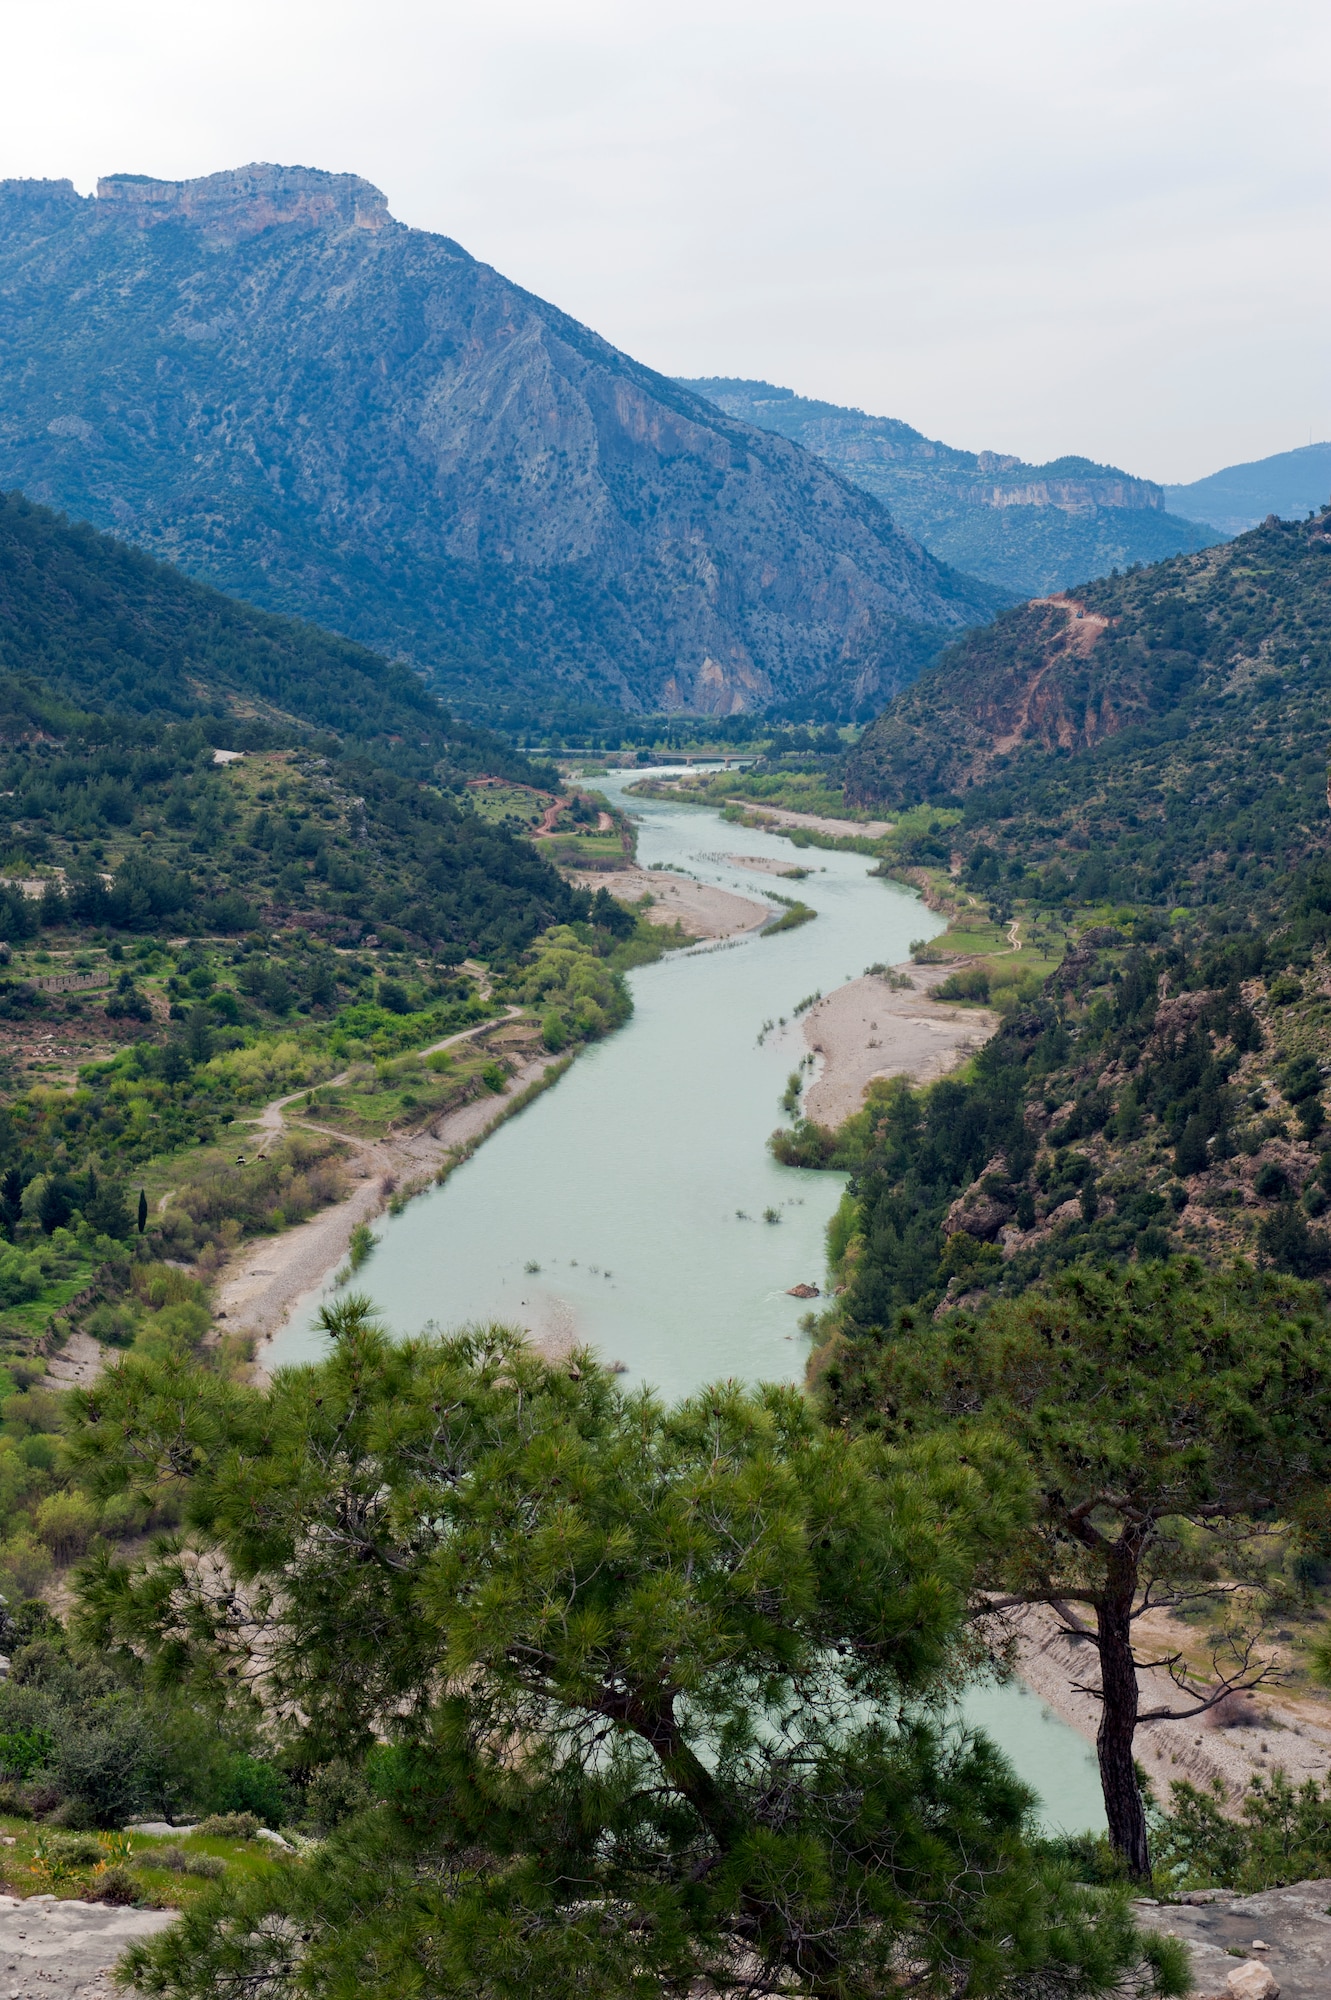 The Goksu River lolls in the valley in the Taurus Mountains of Turkey, March 31, 2013. In 1190, Holy Roman Emperor Frederick I fell off his horse and drowned in this river. (U.S. Air Force photo by Senior Airman Daniel Phelps/Released)